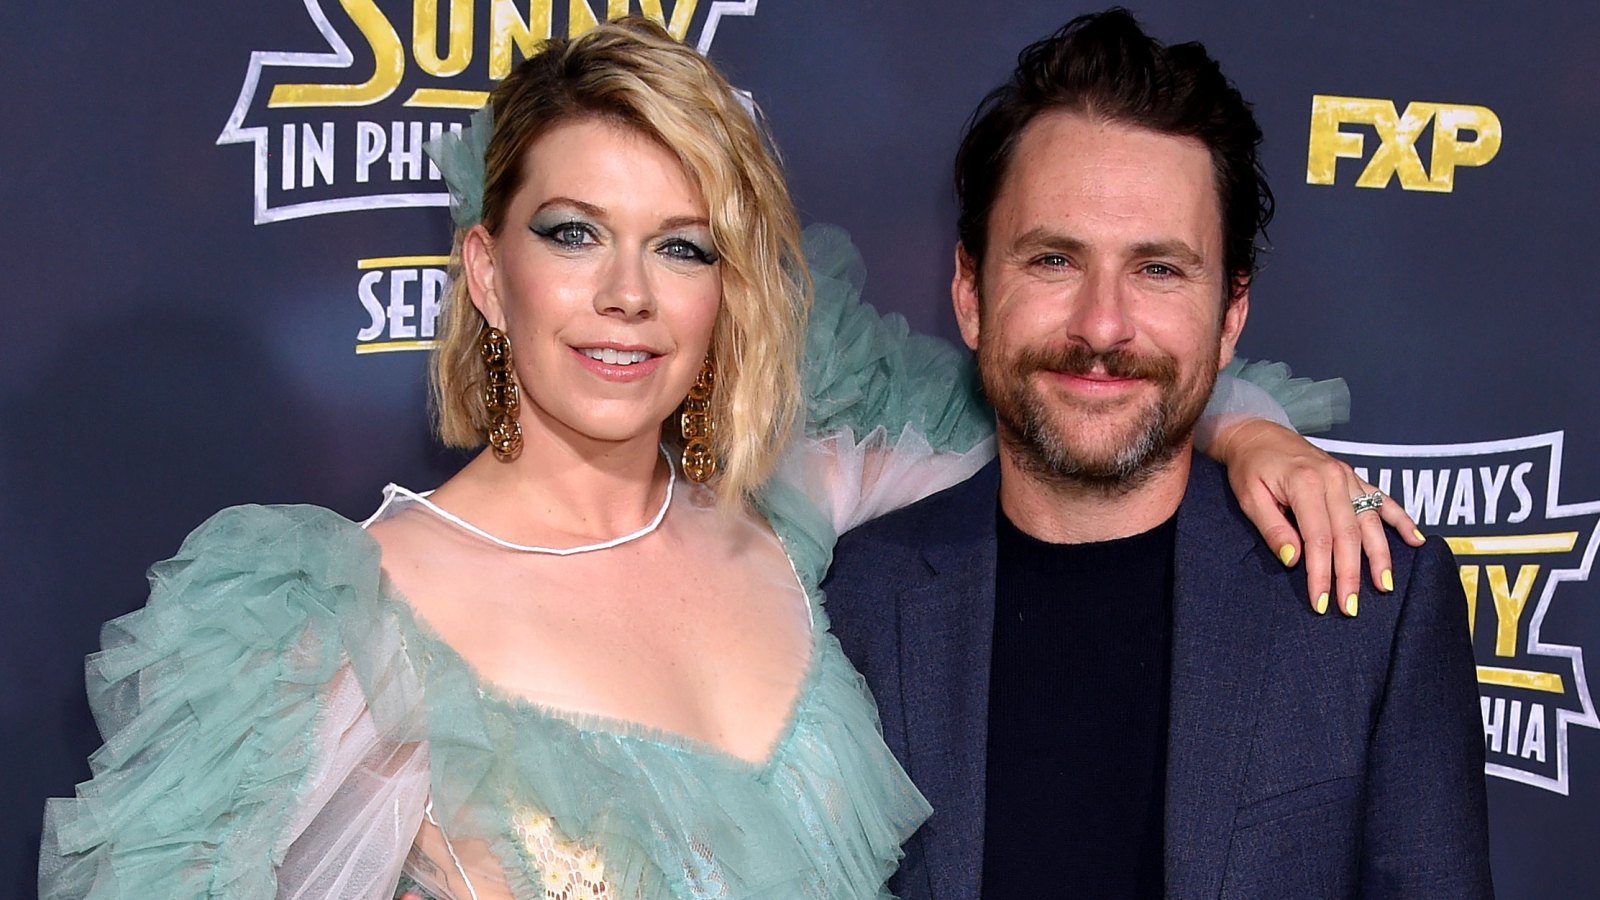 Mary Elizabeth Ellis Says It's 'Good Therapy' to Work Through Problems With Husband Charlie Day While in Character